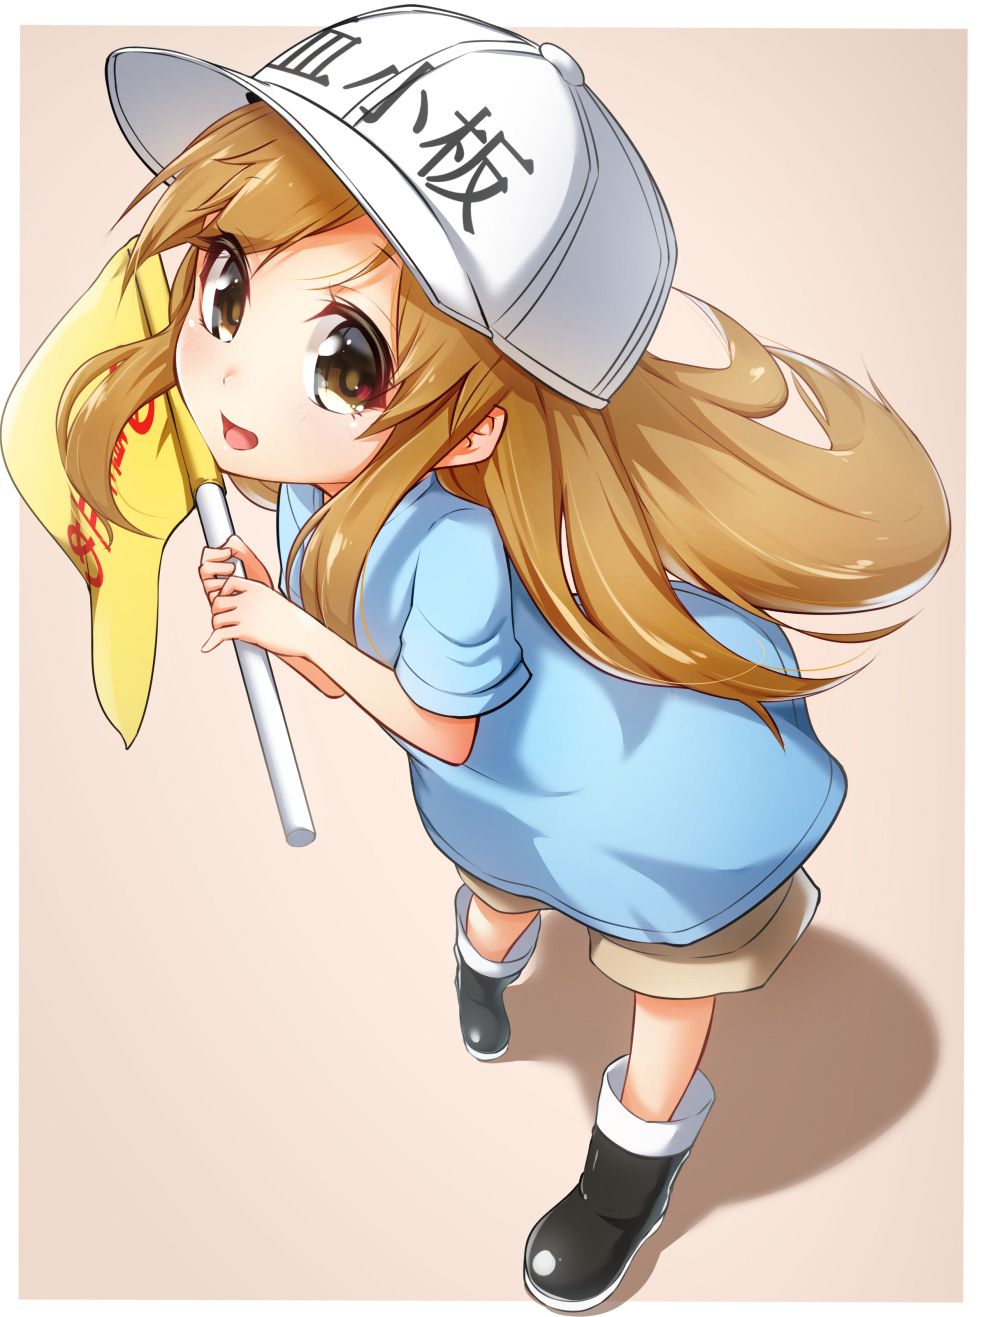 [Working cells] secondary images of platelets 1 60 sheets [ero/non-erotic] 16